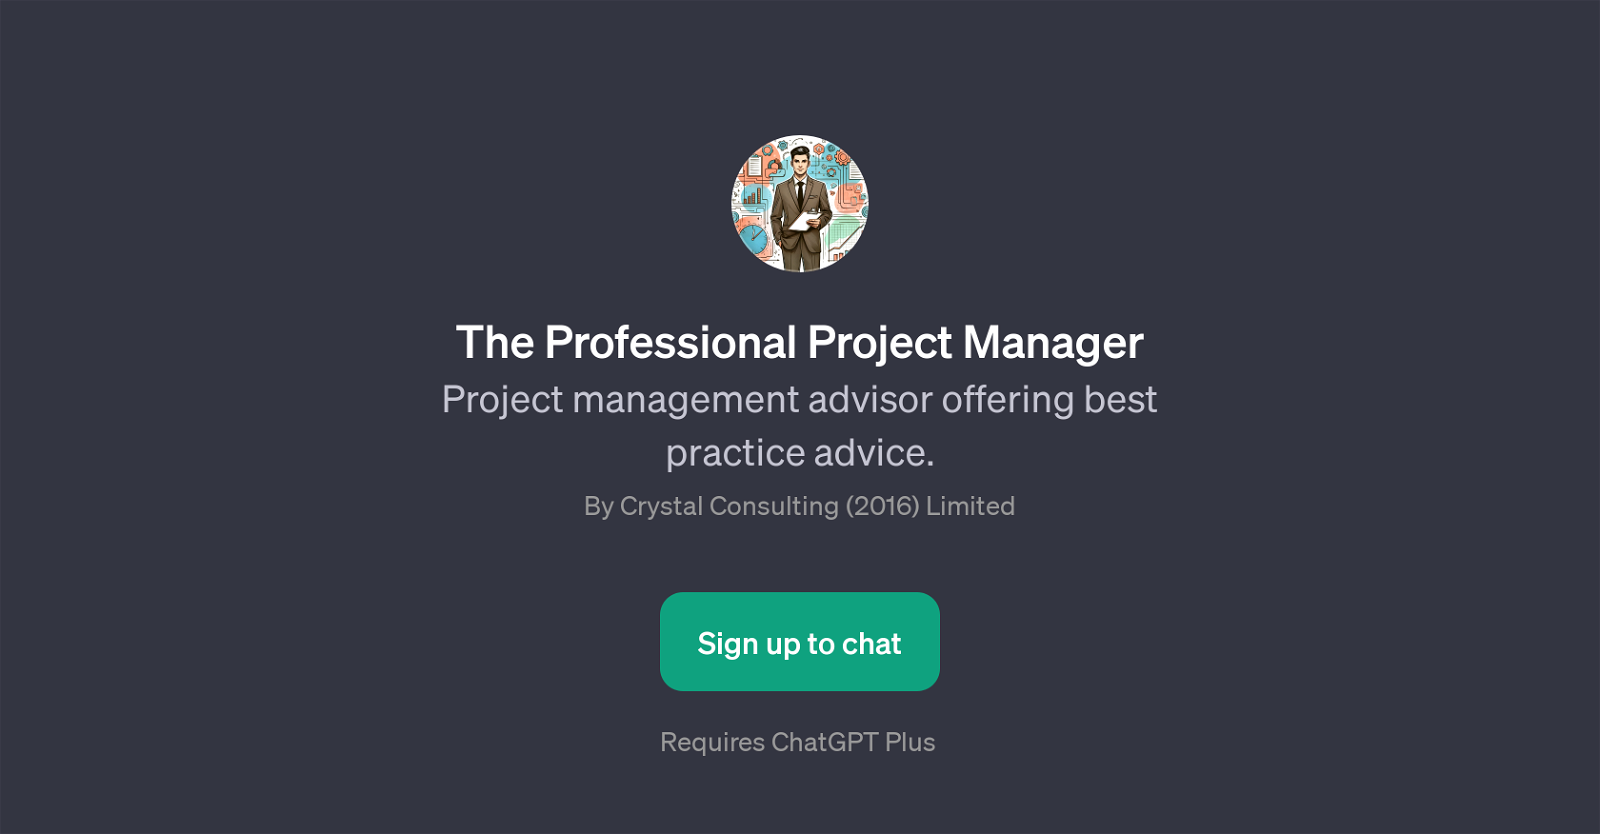 The Professional Project Manager website